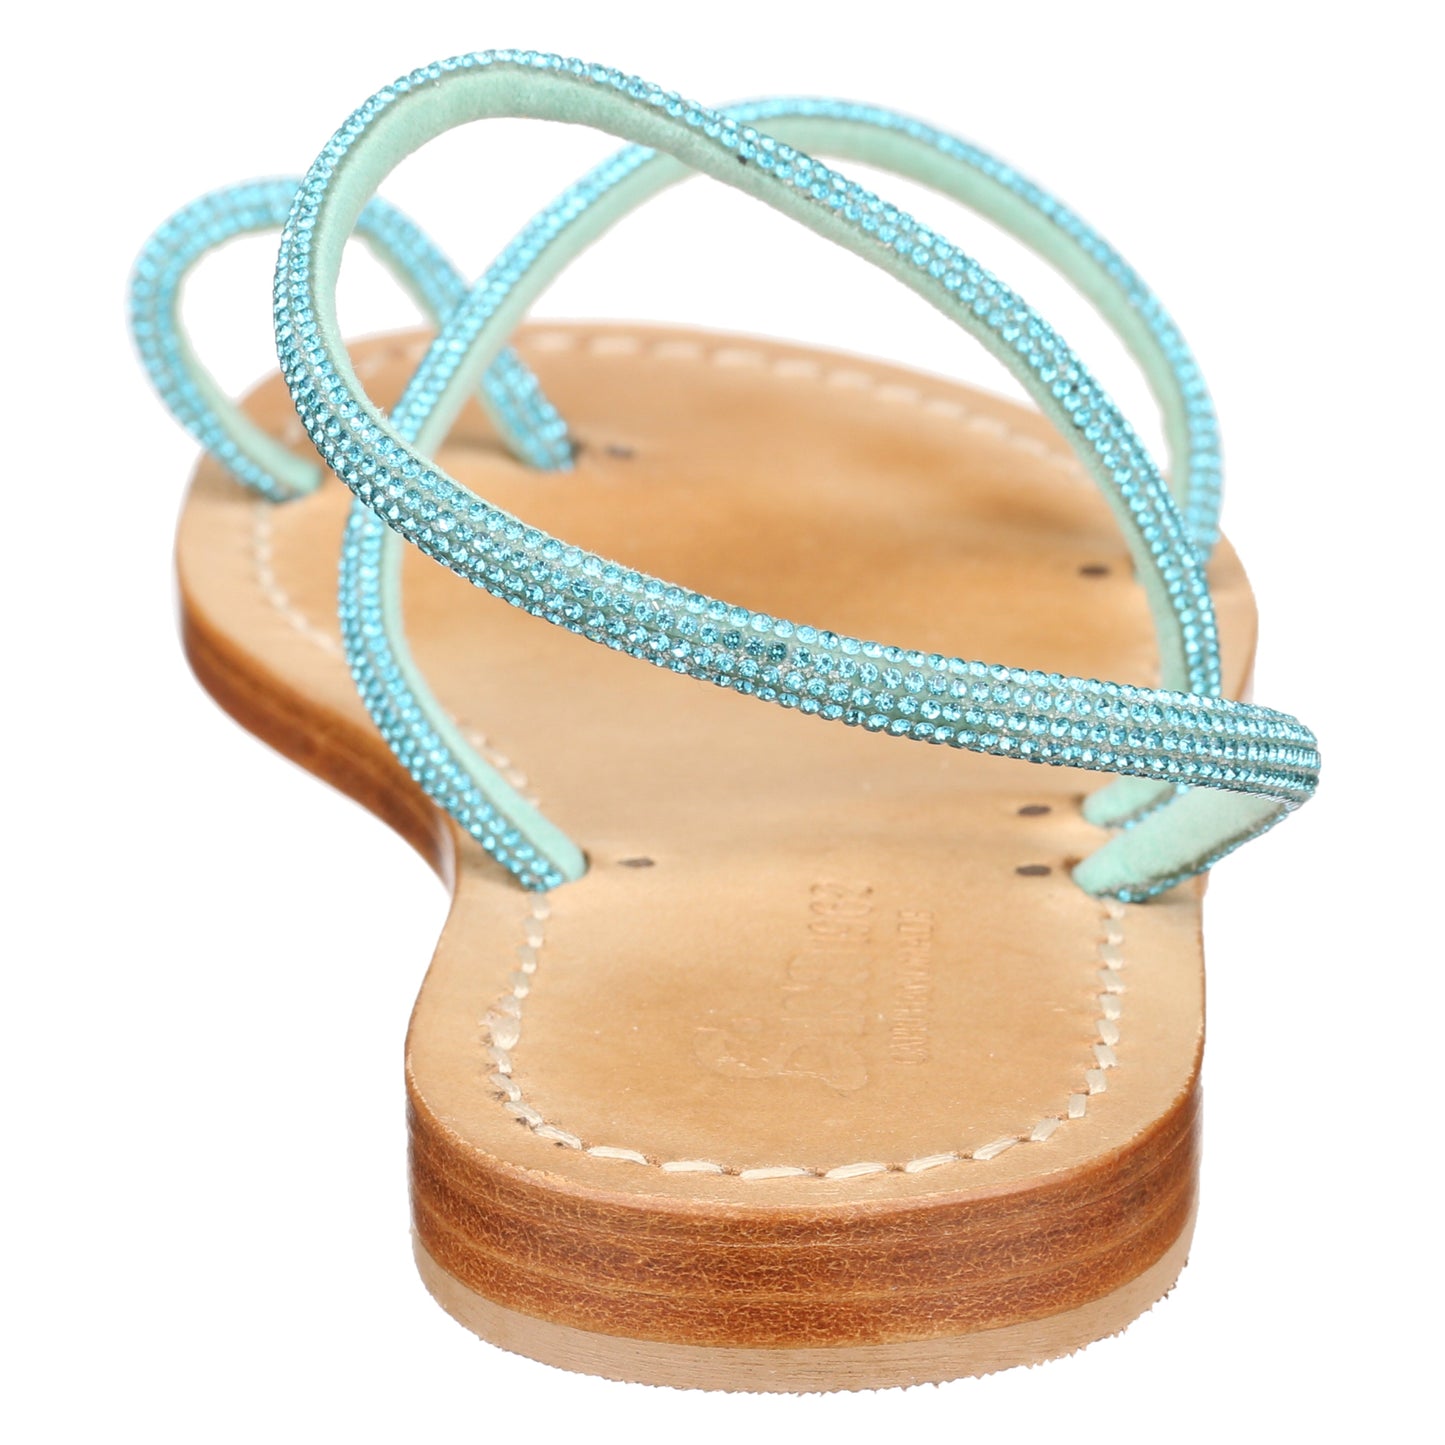 Hayley Sandal in Turquoise